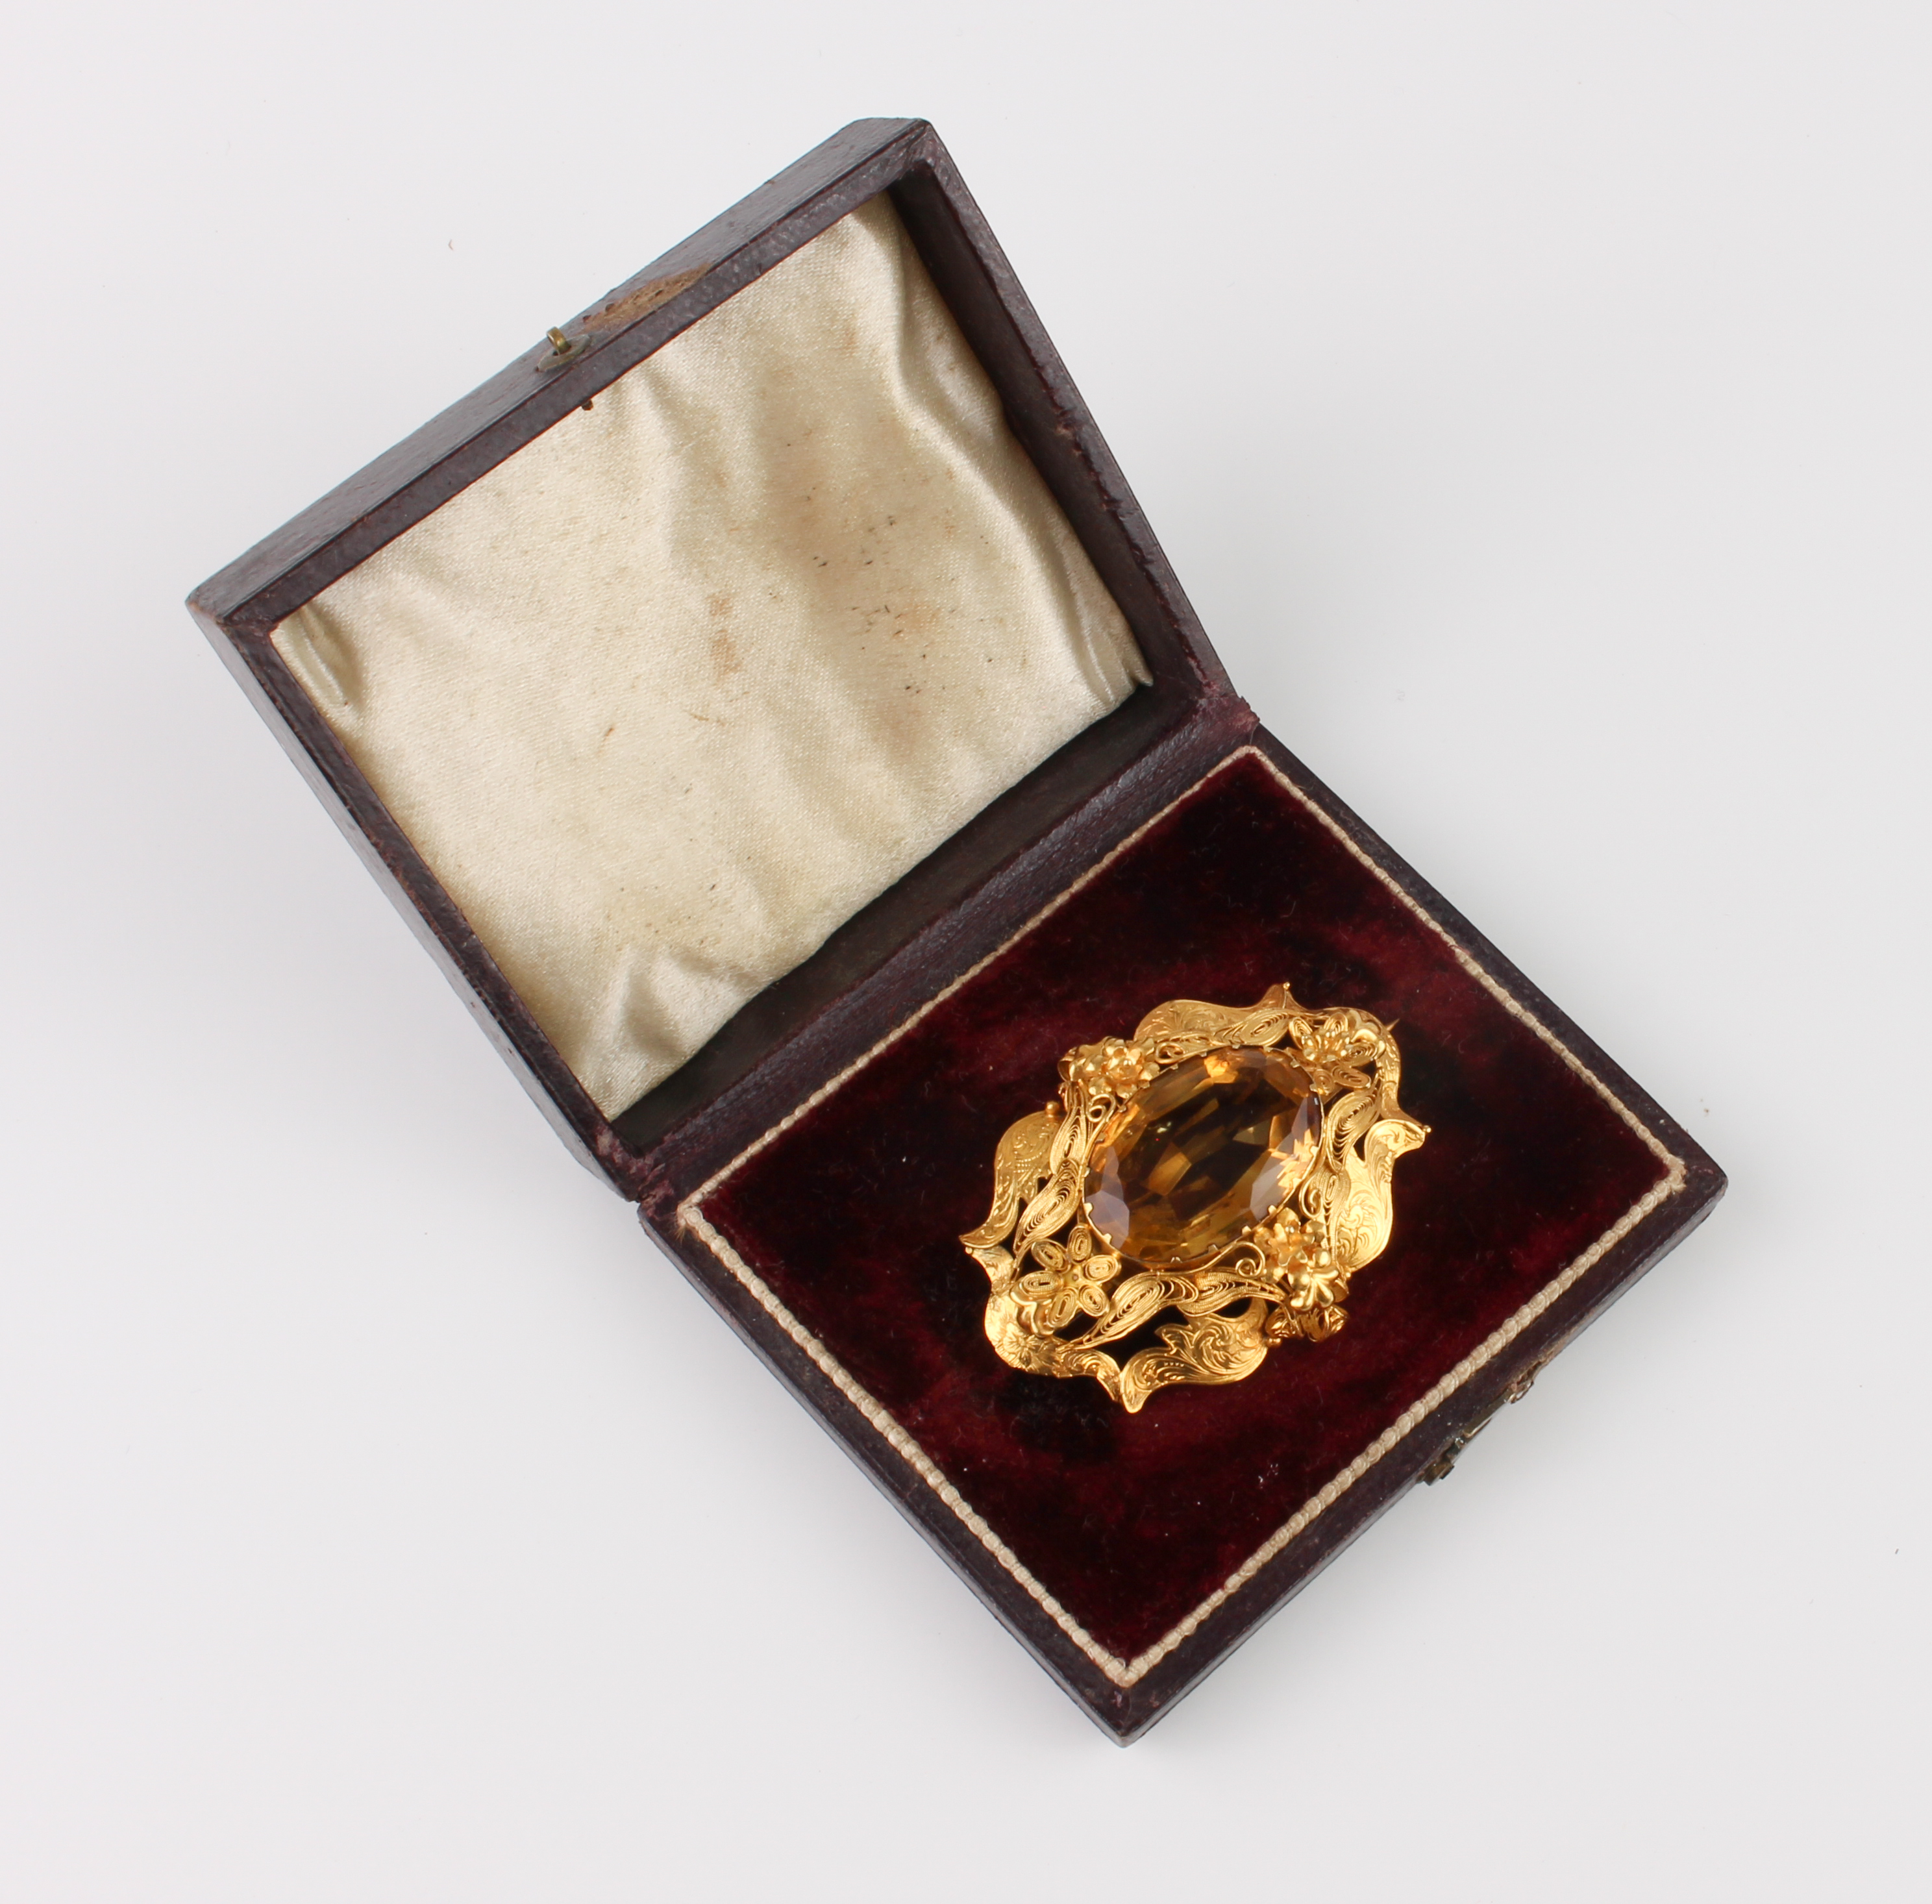 A mid-19th century 18ct gold and citrine brooch - the 21.5 x 14.5mm oval, mixed cut citrine